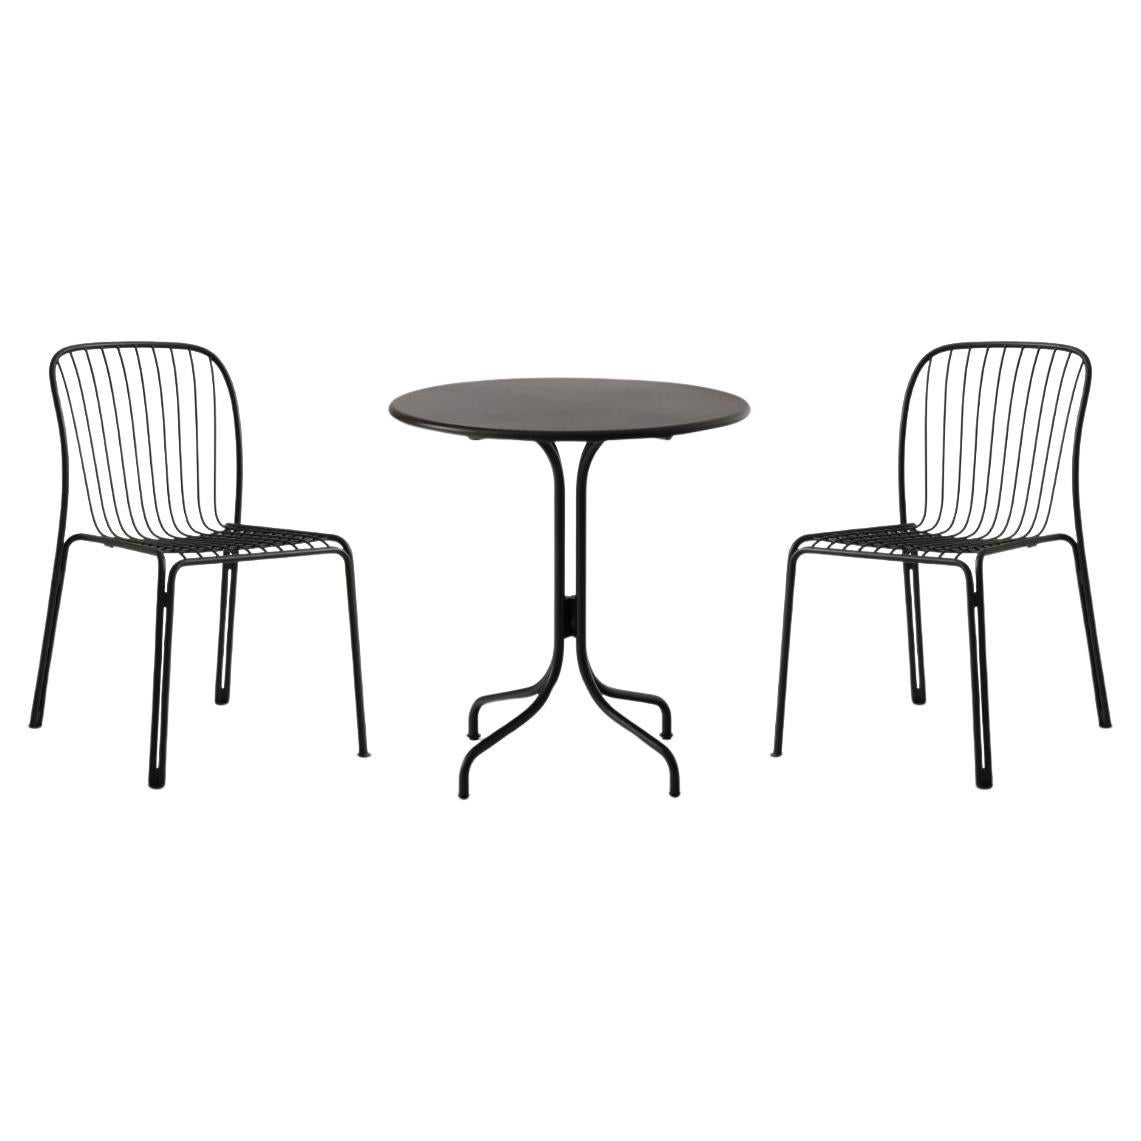 Set of Thorvald Outdoor Side Chairs/Table-Warm Black, by Space Copenhagen for &T